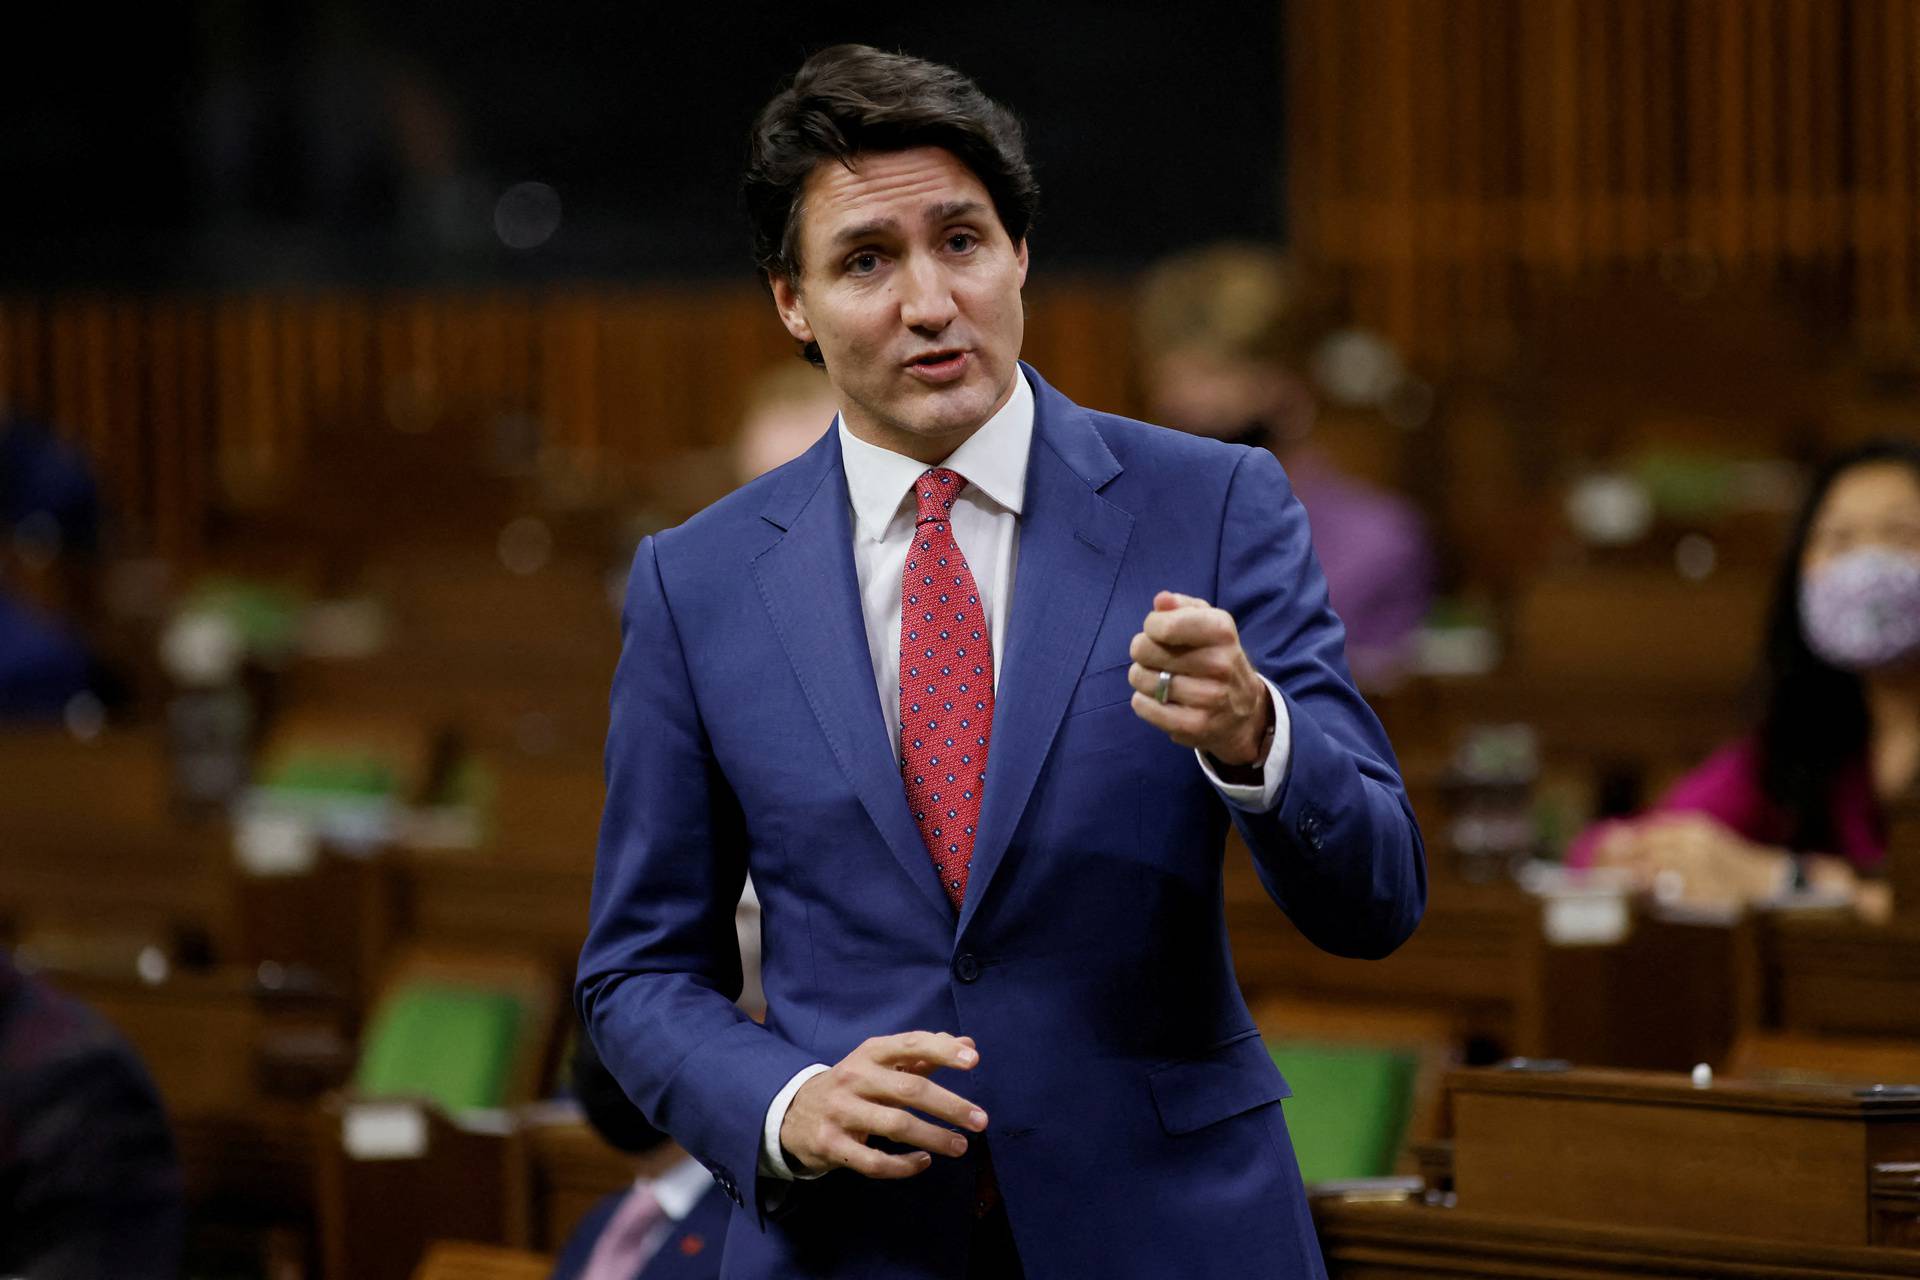 FILE PHOTO: Canada's Prime Minister Justin Trudeau speaks during Question Period in the House of Commons on Parliament Hill in Ottawa